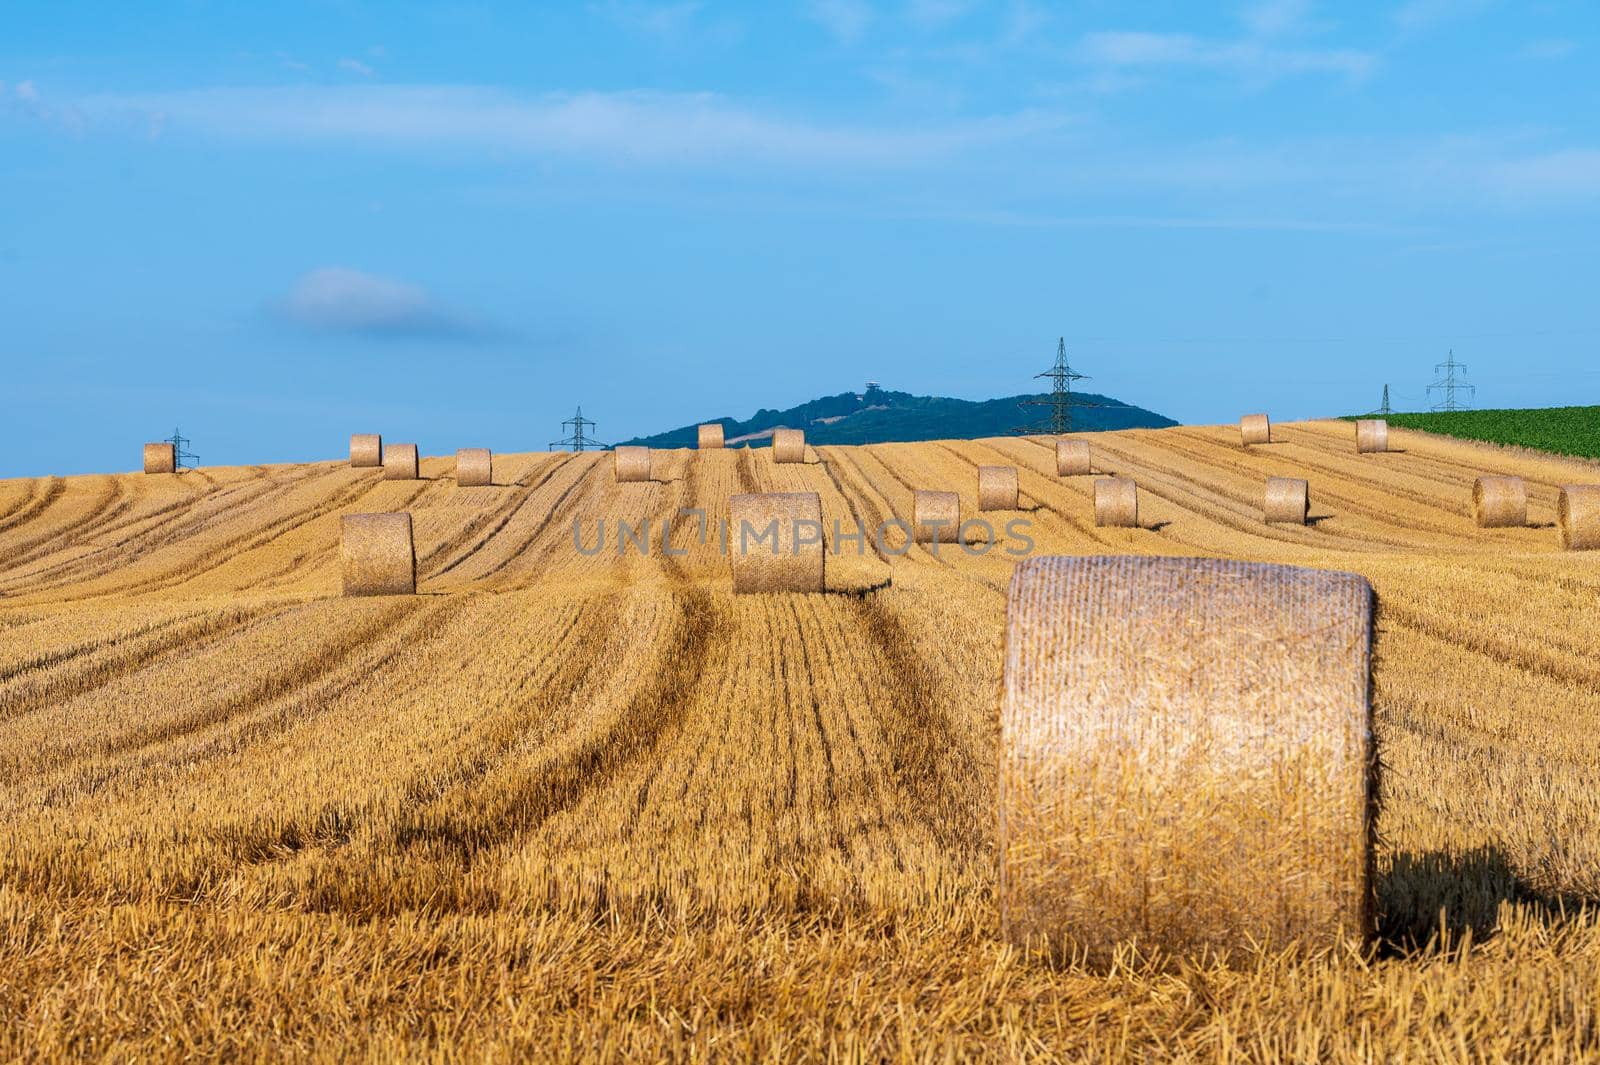 A wheat field after harvest with lots of straw bales in the sunshine and a deep blue sky.